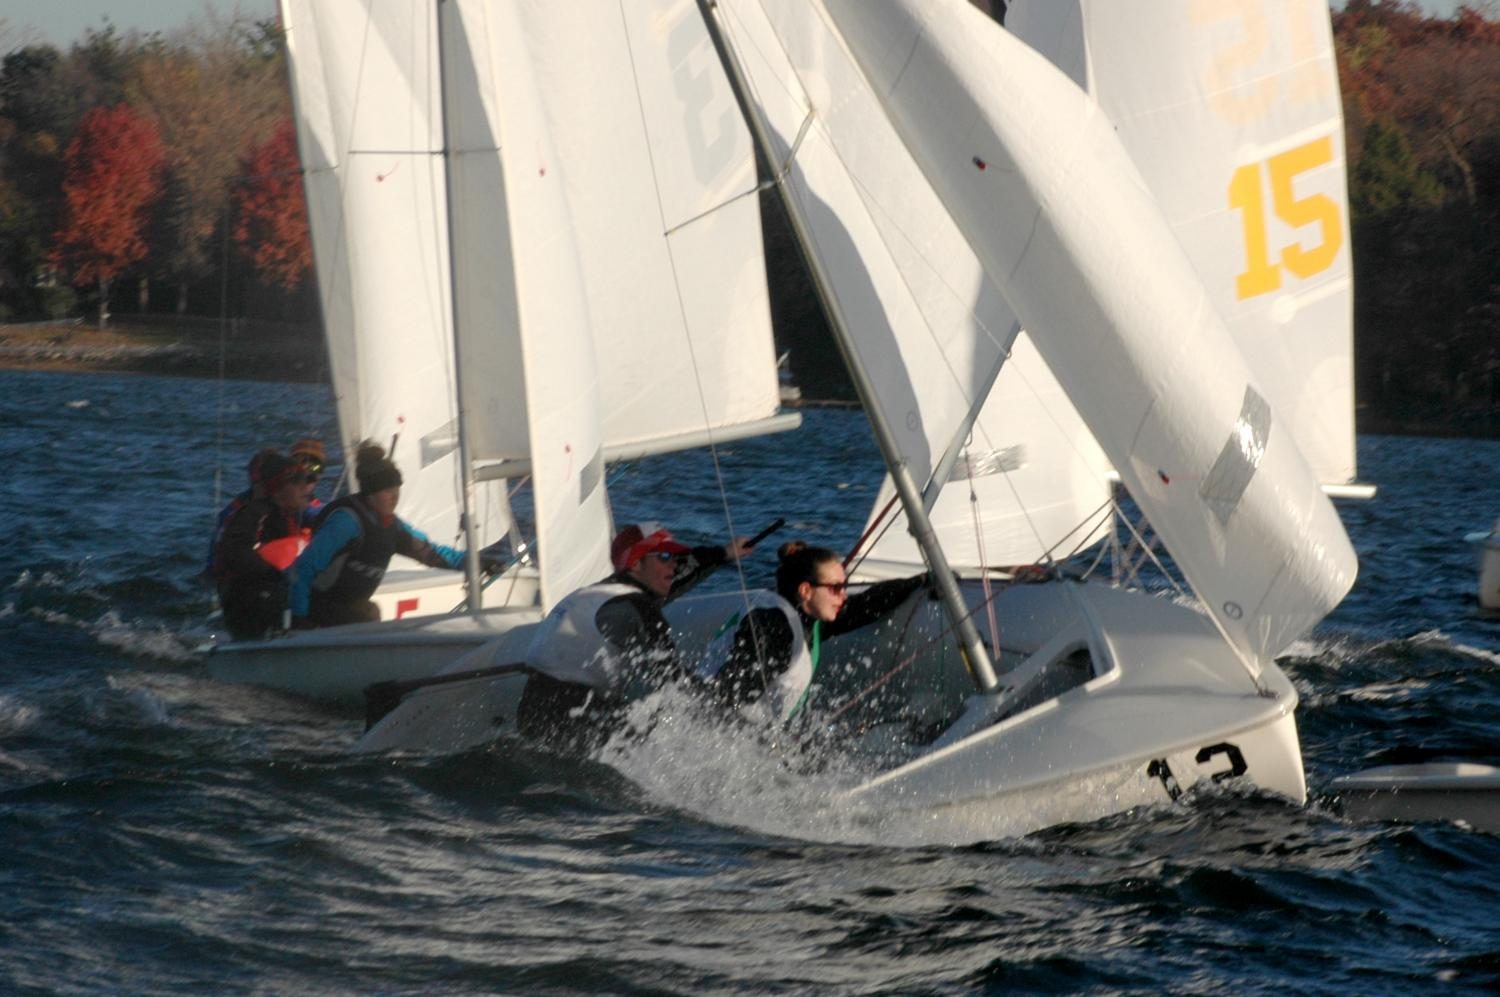 Senior Jack Indritz sails at a regatta in a two-person boat. Once you race for a while with your crew, you don’t really need to communicate anymore because you’ve practiced so much that you know what the other person is gonna do and when, Indritz said.